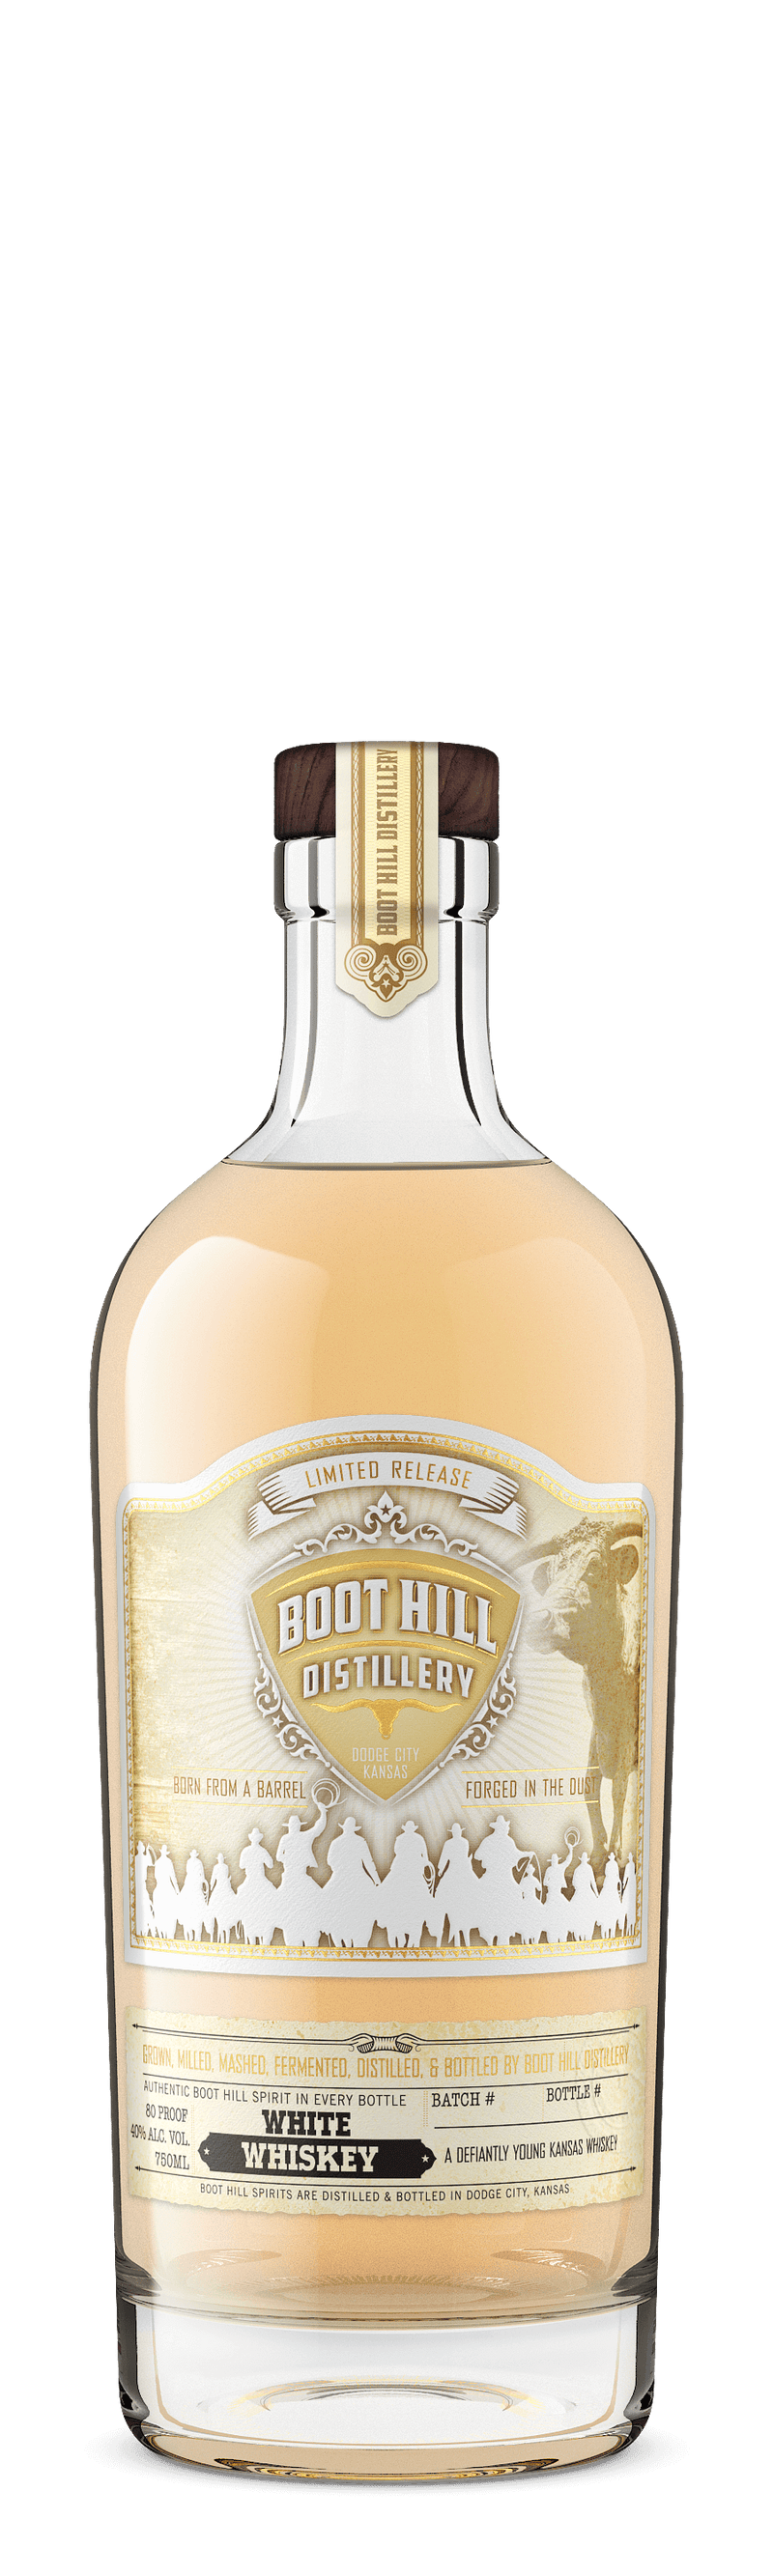 Boot Hill Distillery White Whiskey